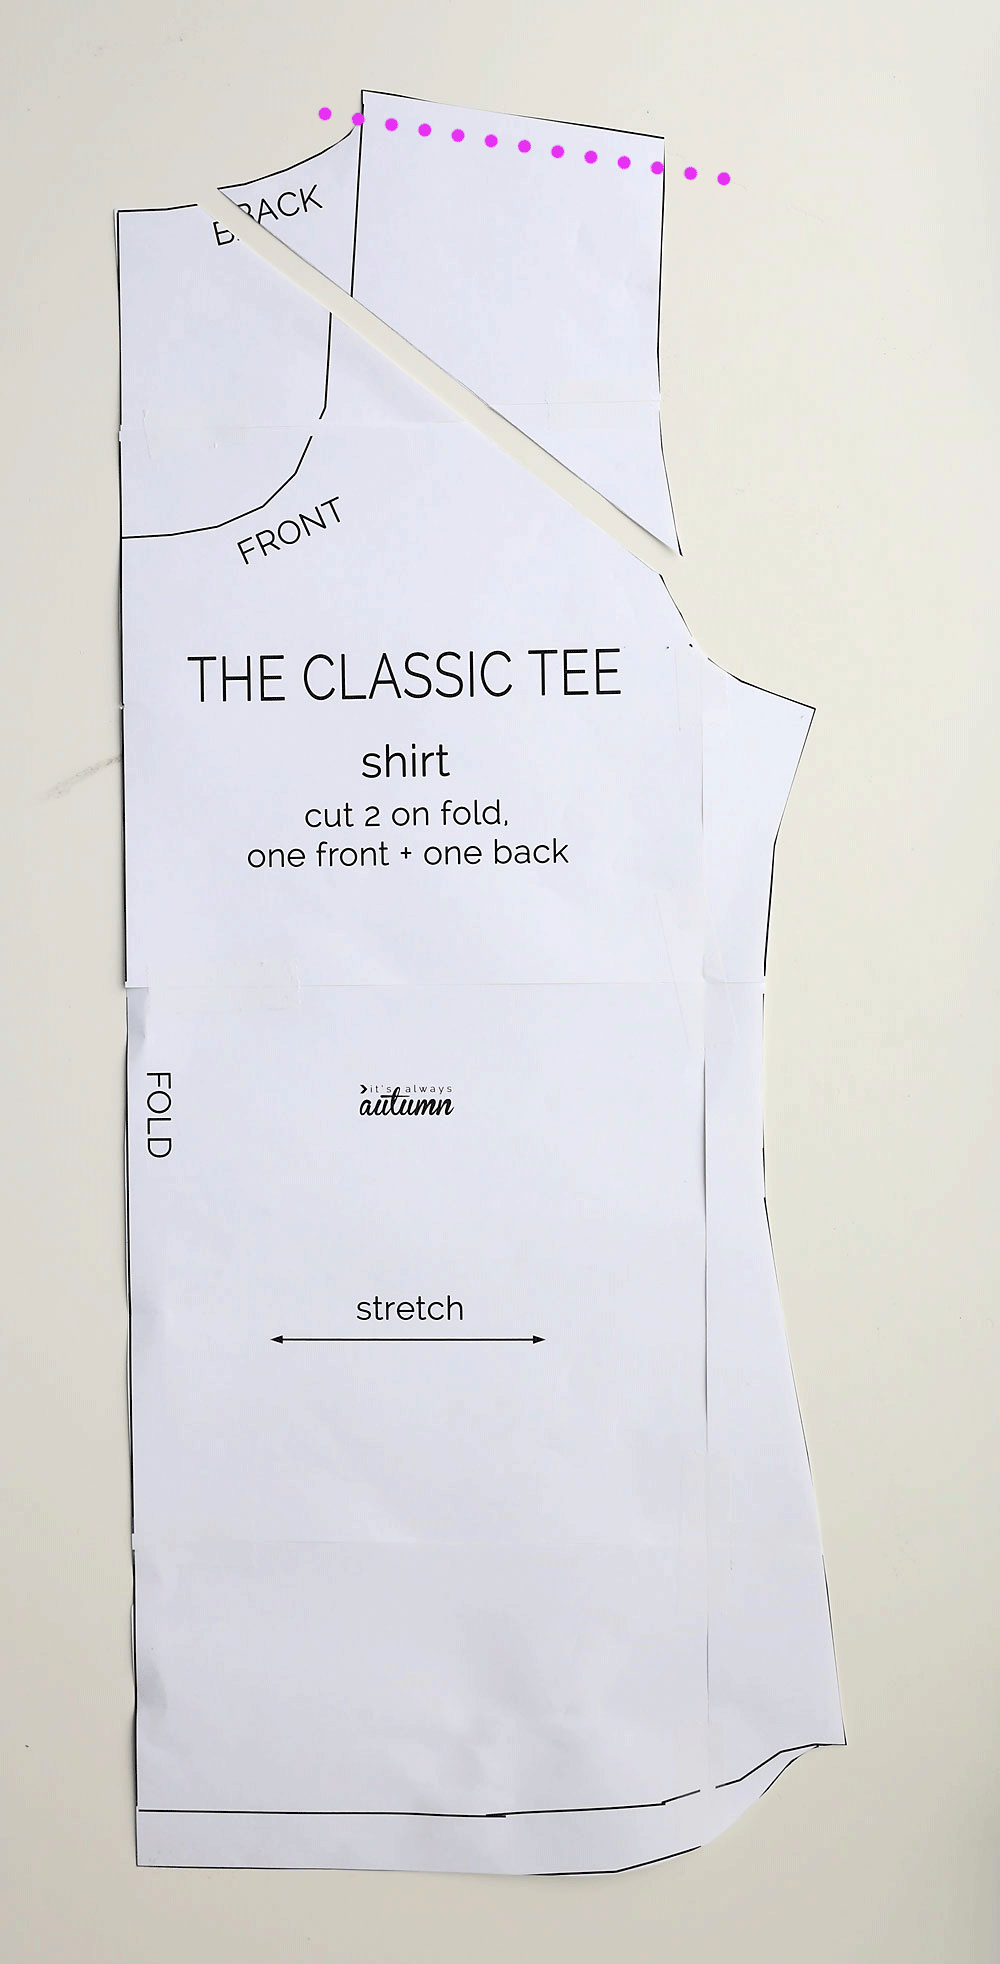 The Classic Tee shirt sewing pattern